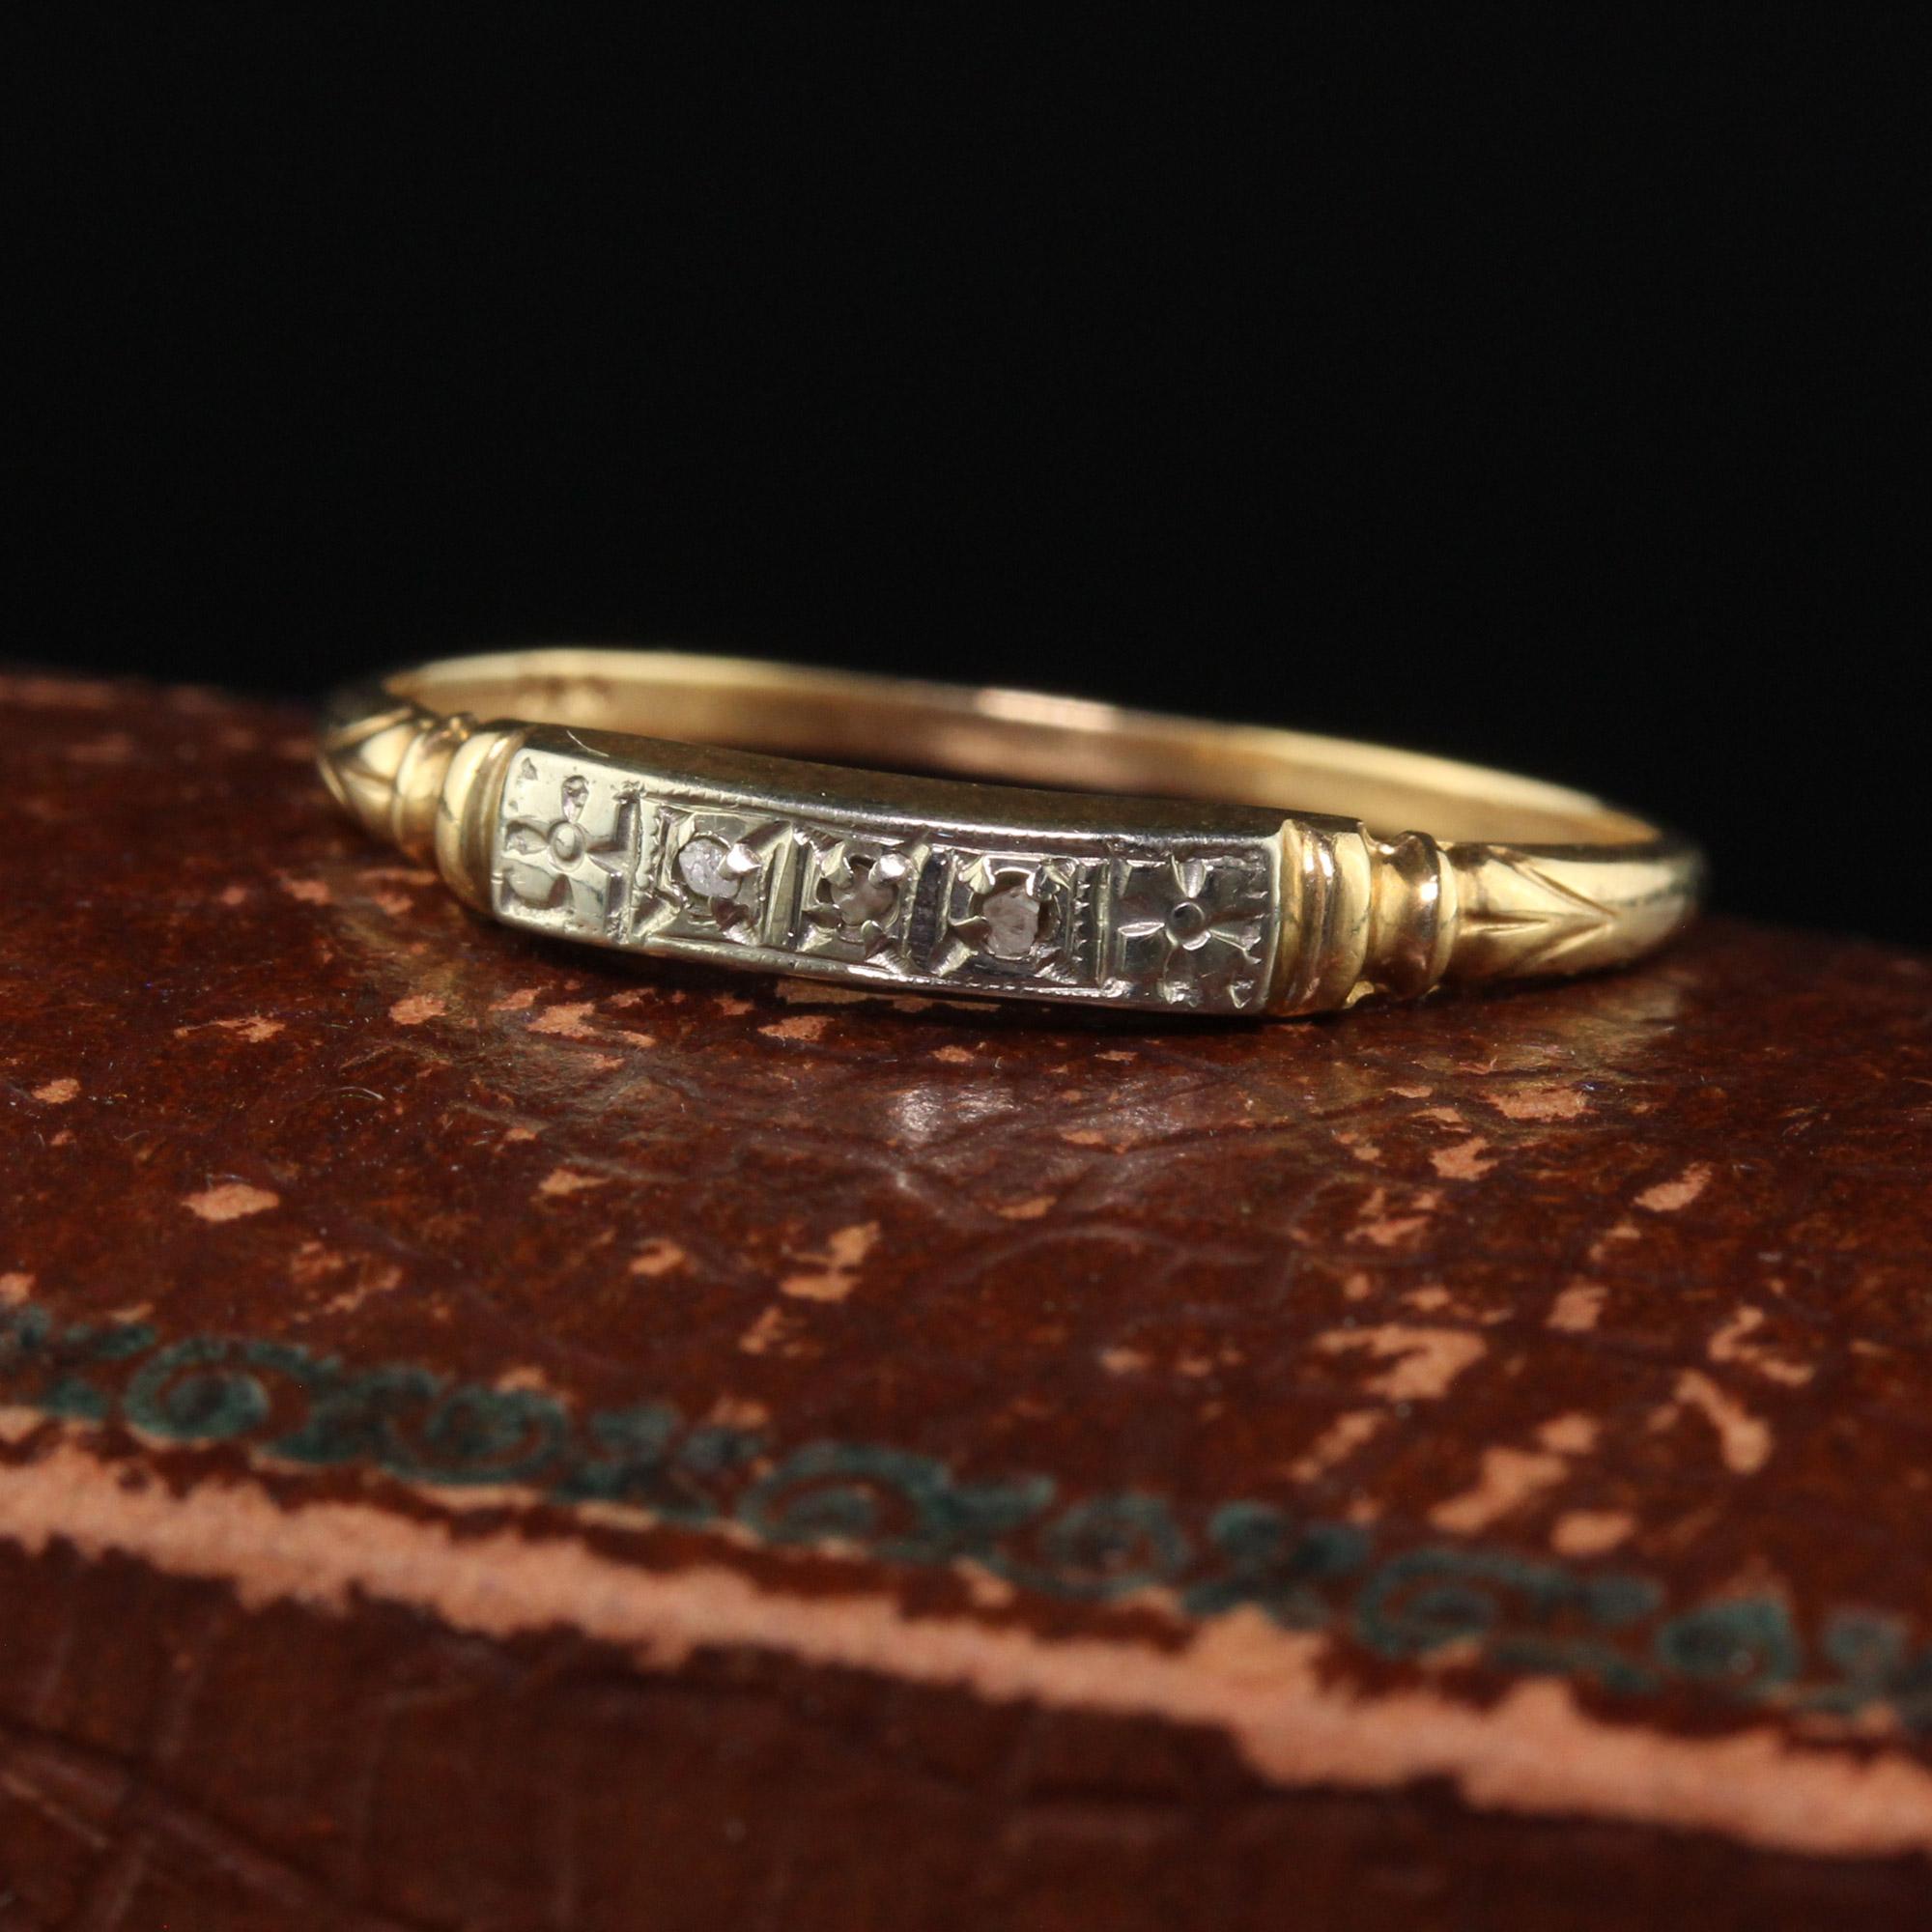 Beautiful Antique Art Deco 14K Yellow Gold Rose Cut Diamond Wedding Band - Size 6 1/4. This beautiful wedding band is crafted in 14k yellow gold. The center holds three small rose cut diamonds. The ring is in good condition and sits low on the